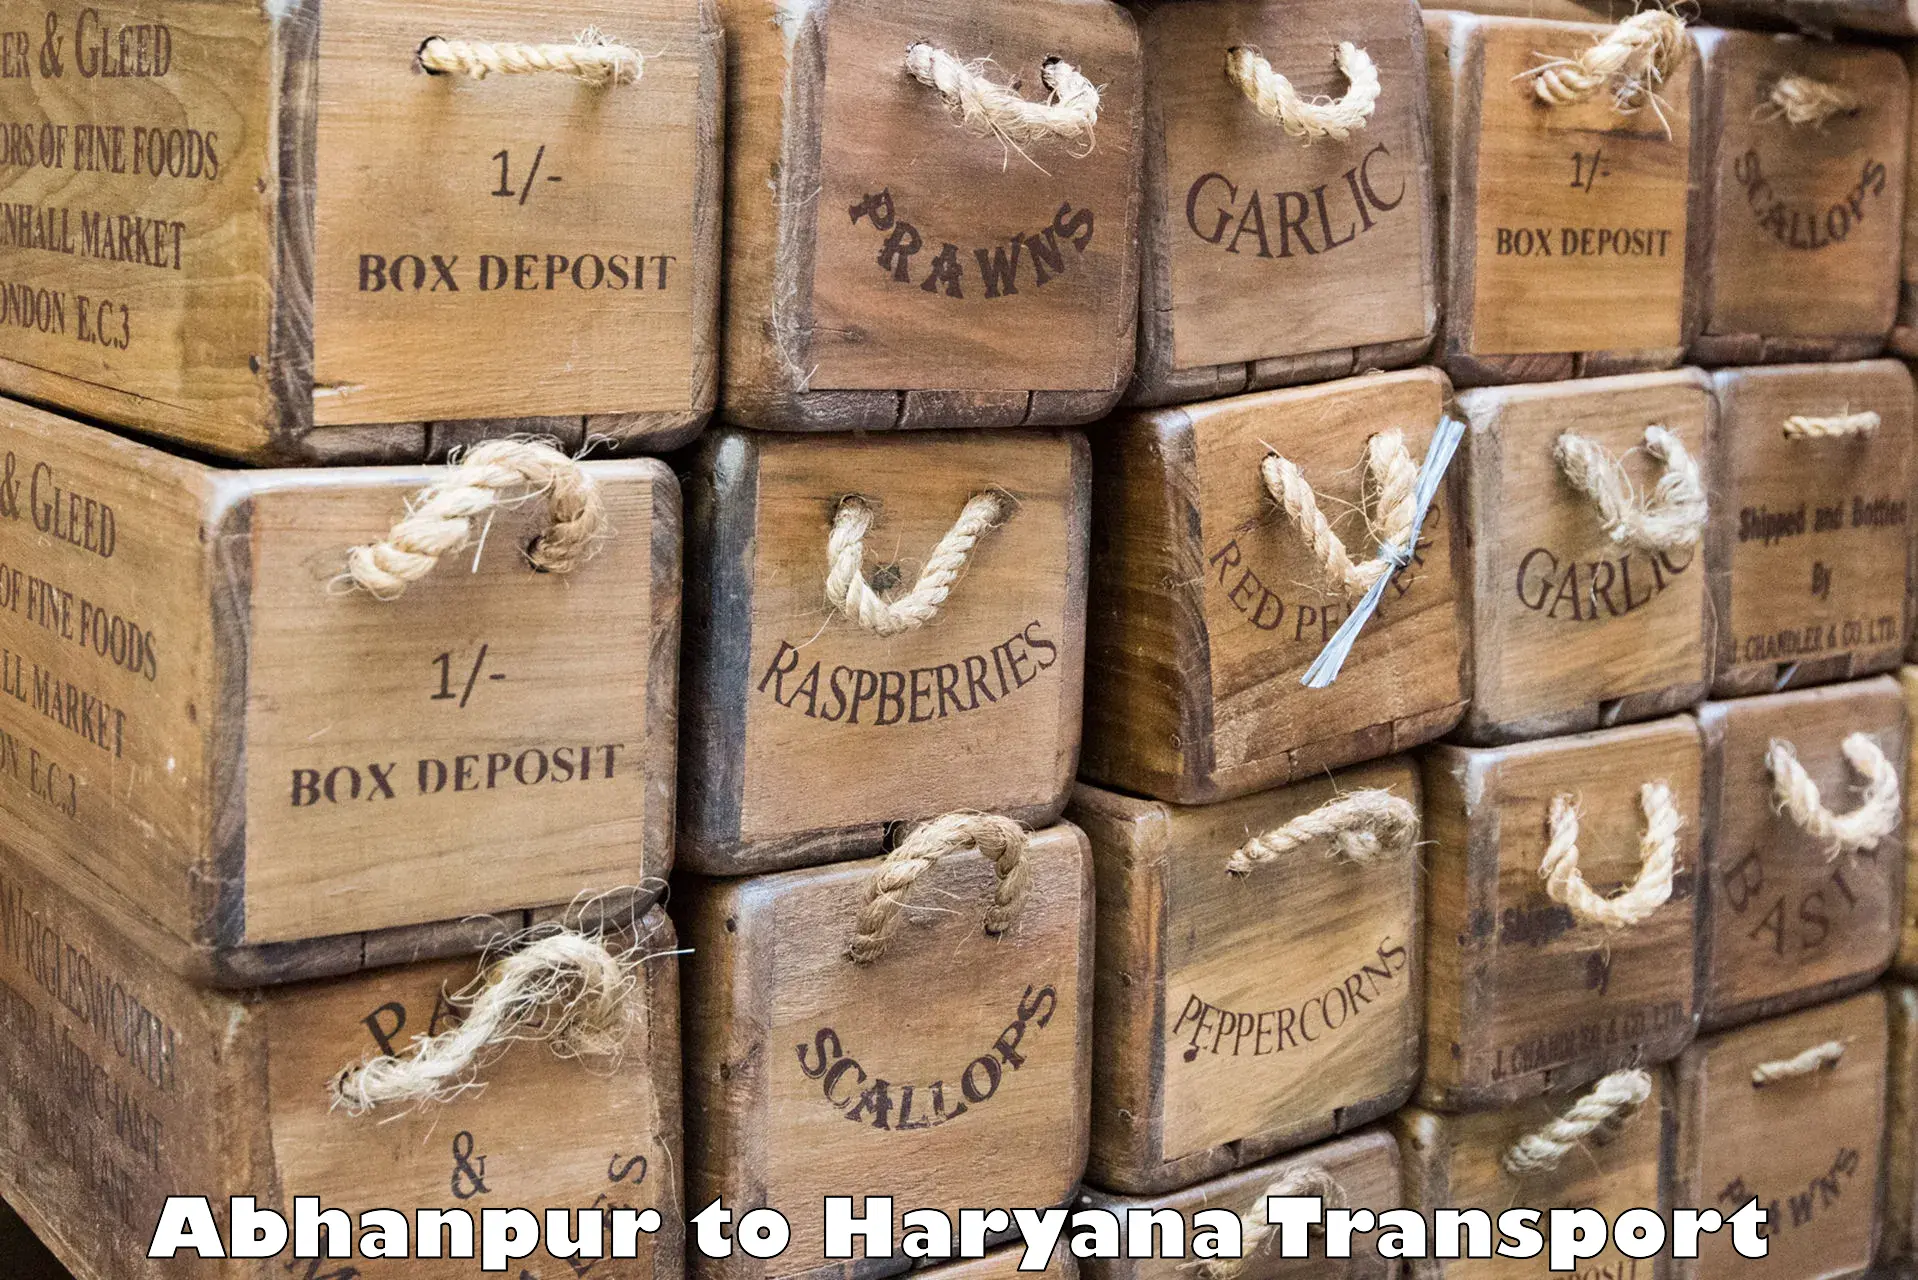 Air freight transport services Abhanpur to Ambala